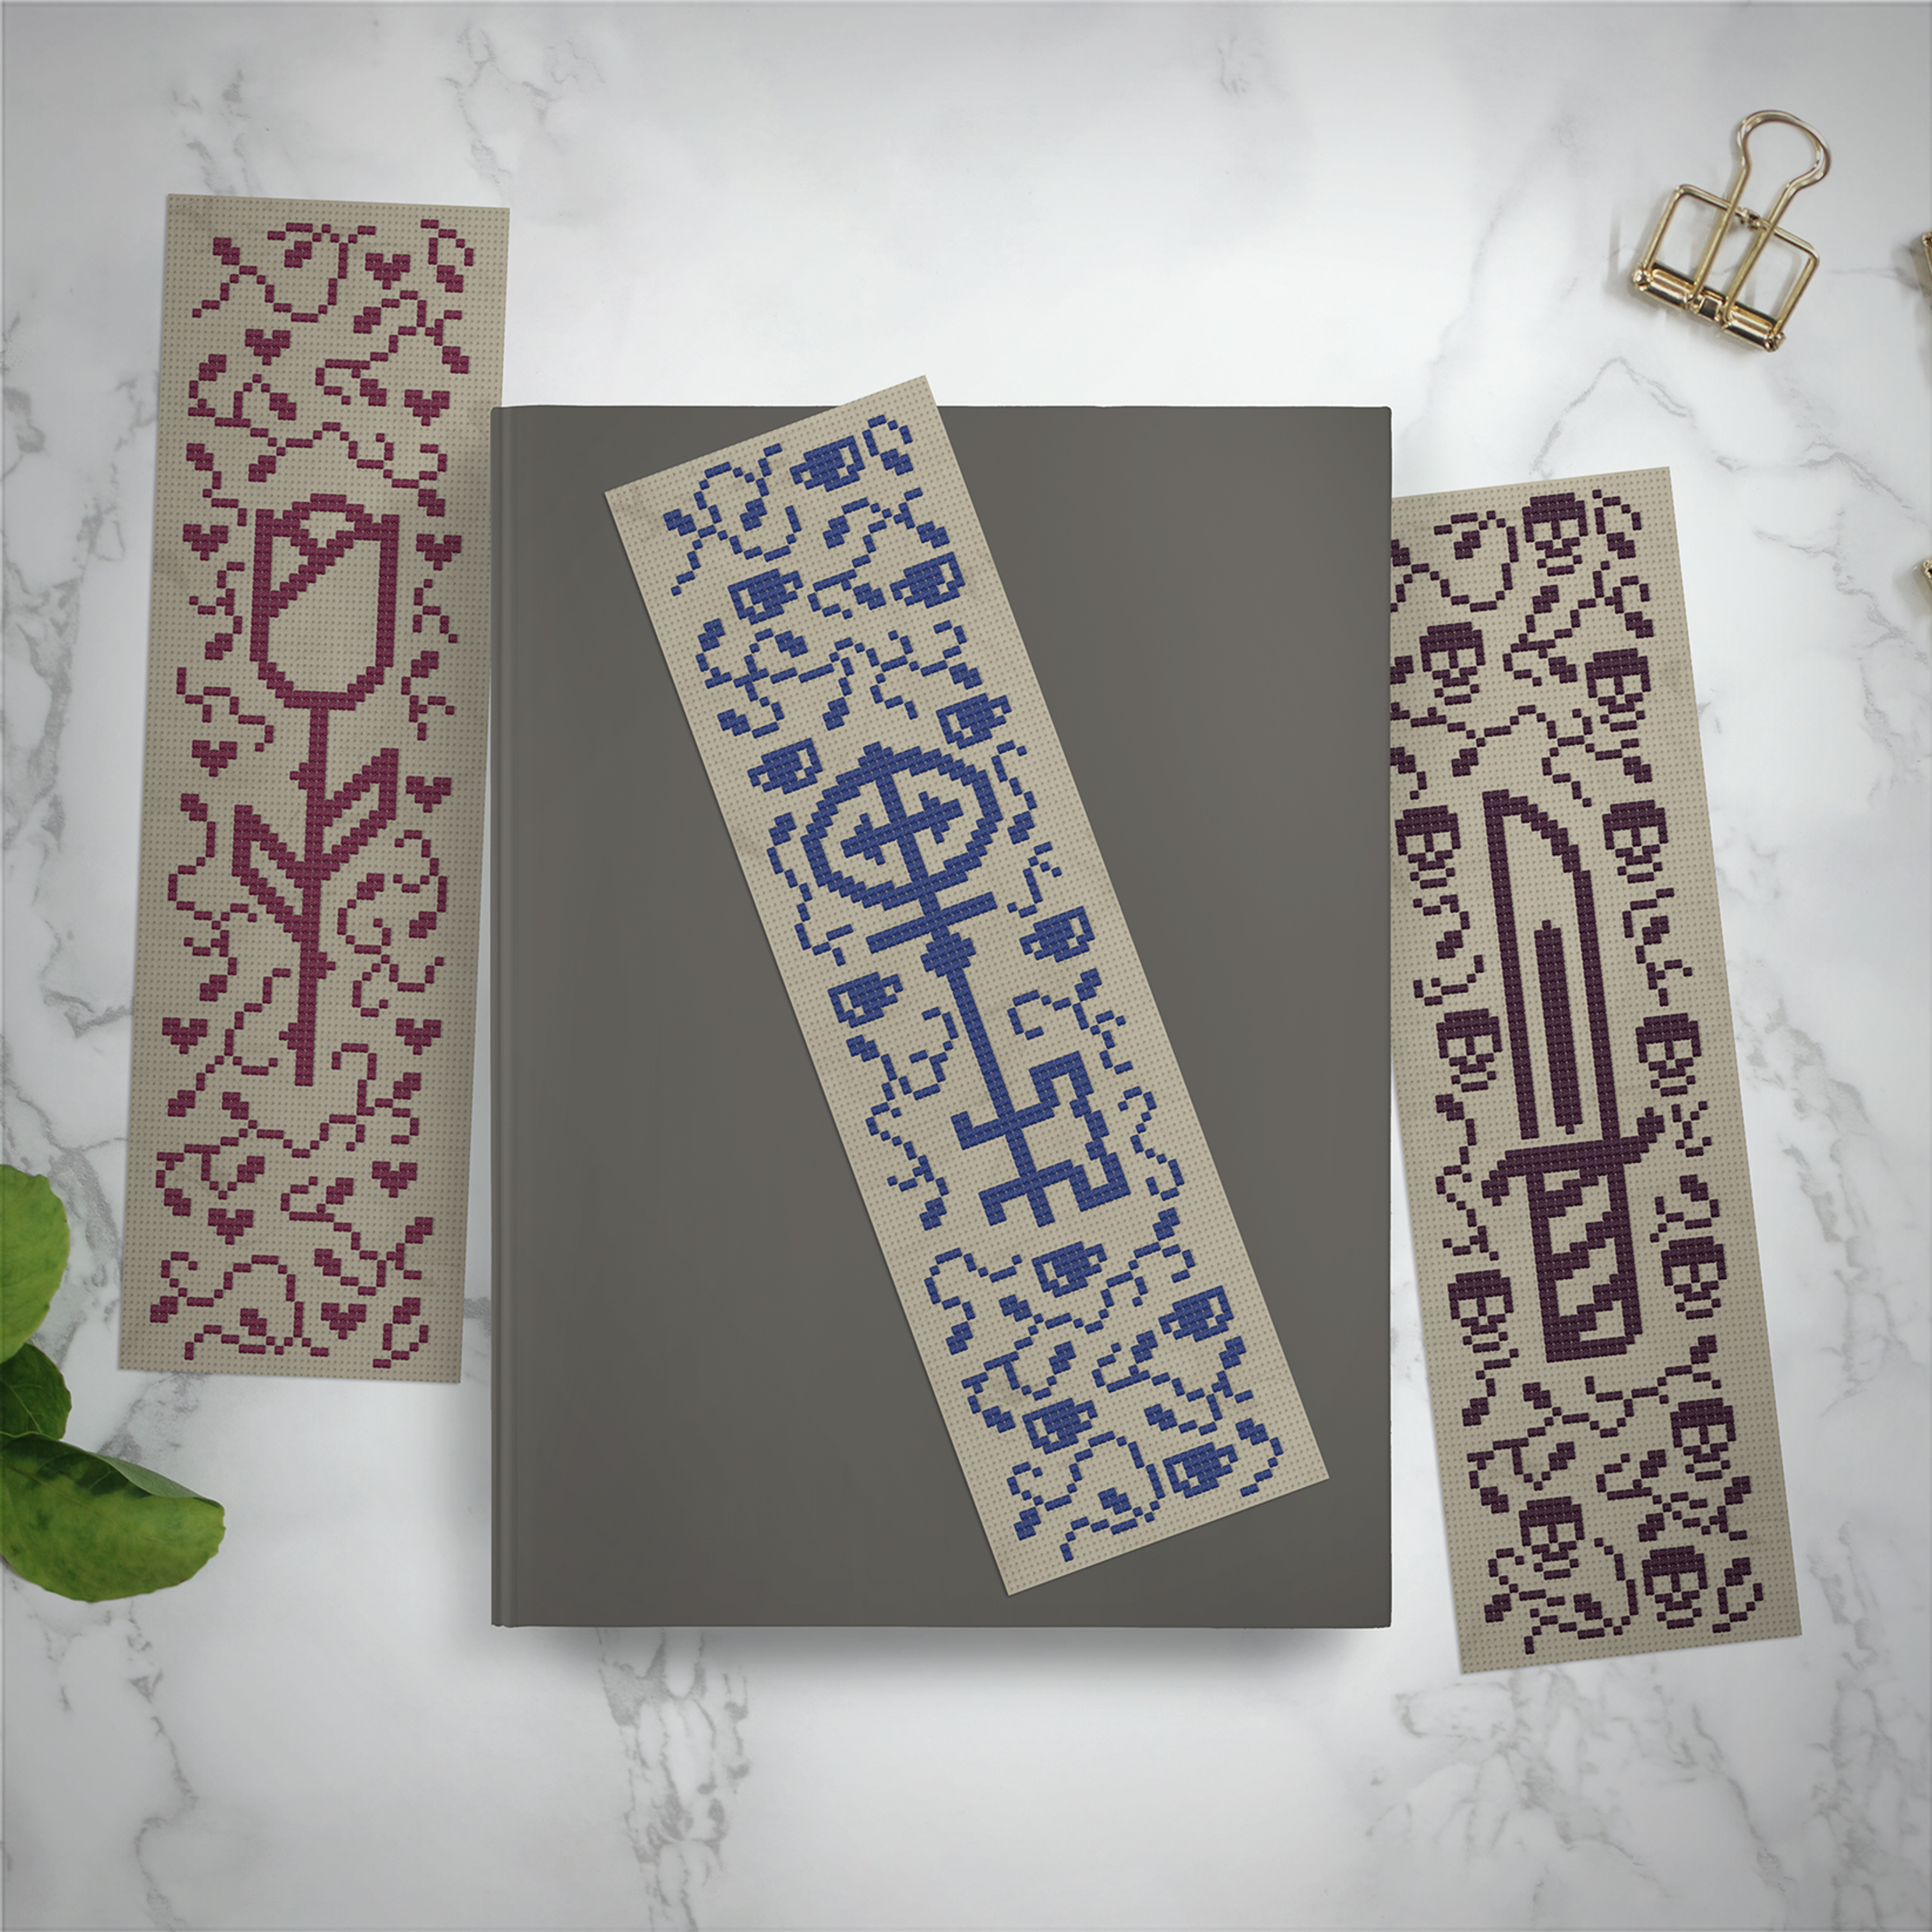 Key, Rose, and Knife Genre Themed Bookmarks